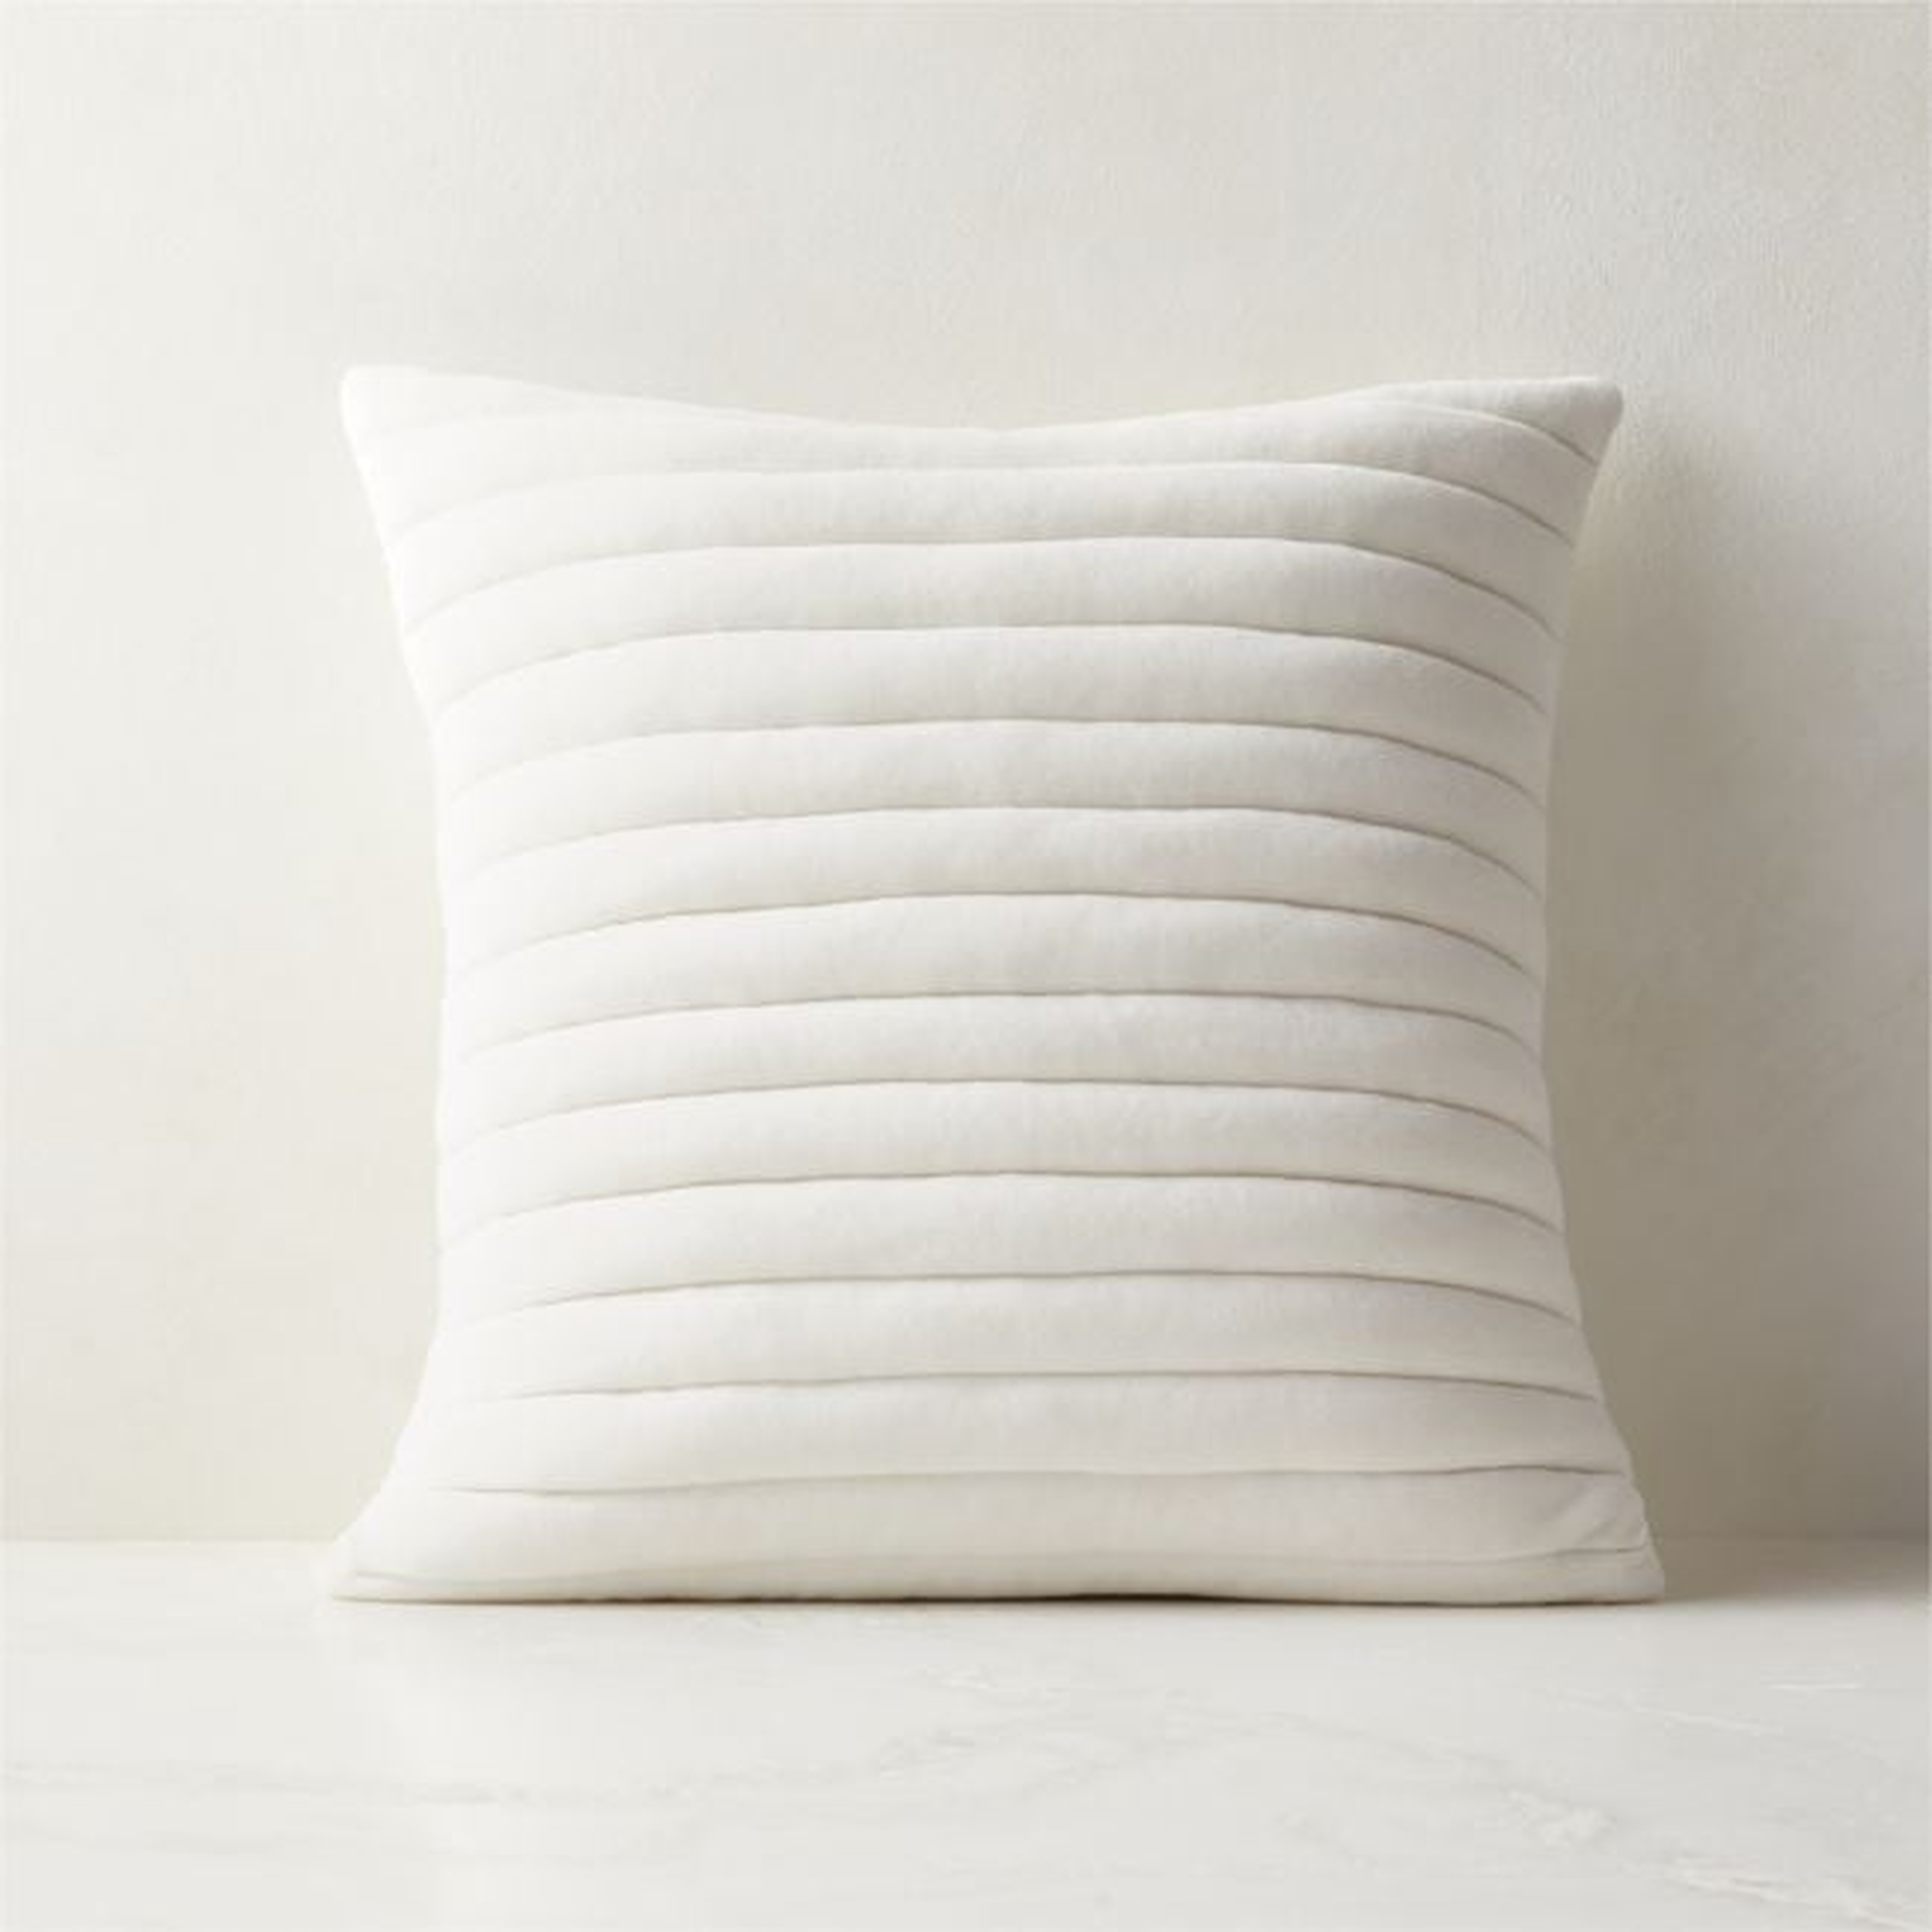 18" Channeled White Velvet Pillow With Feather-Down Insert - CB2